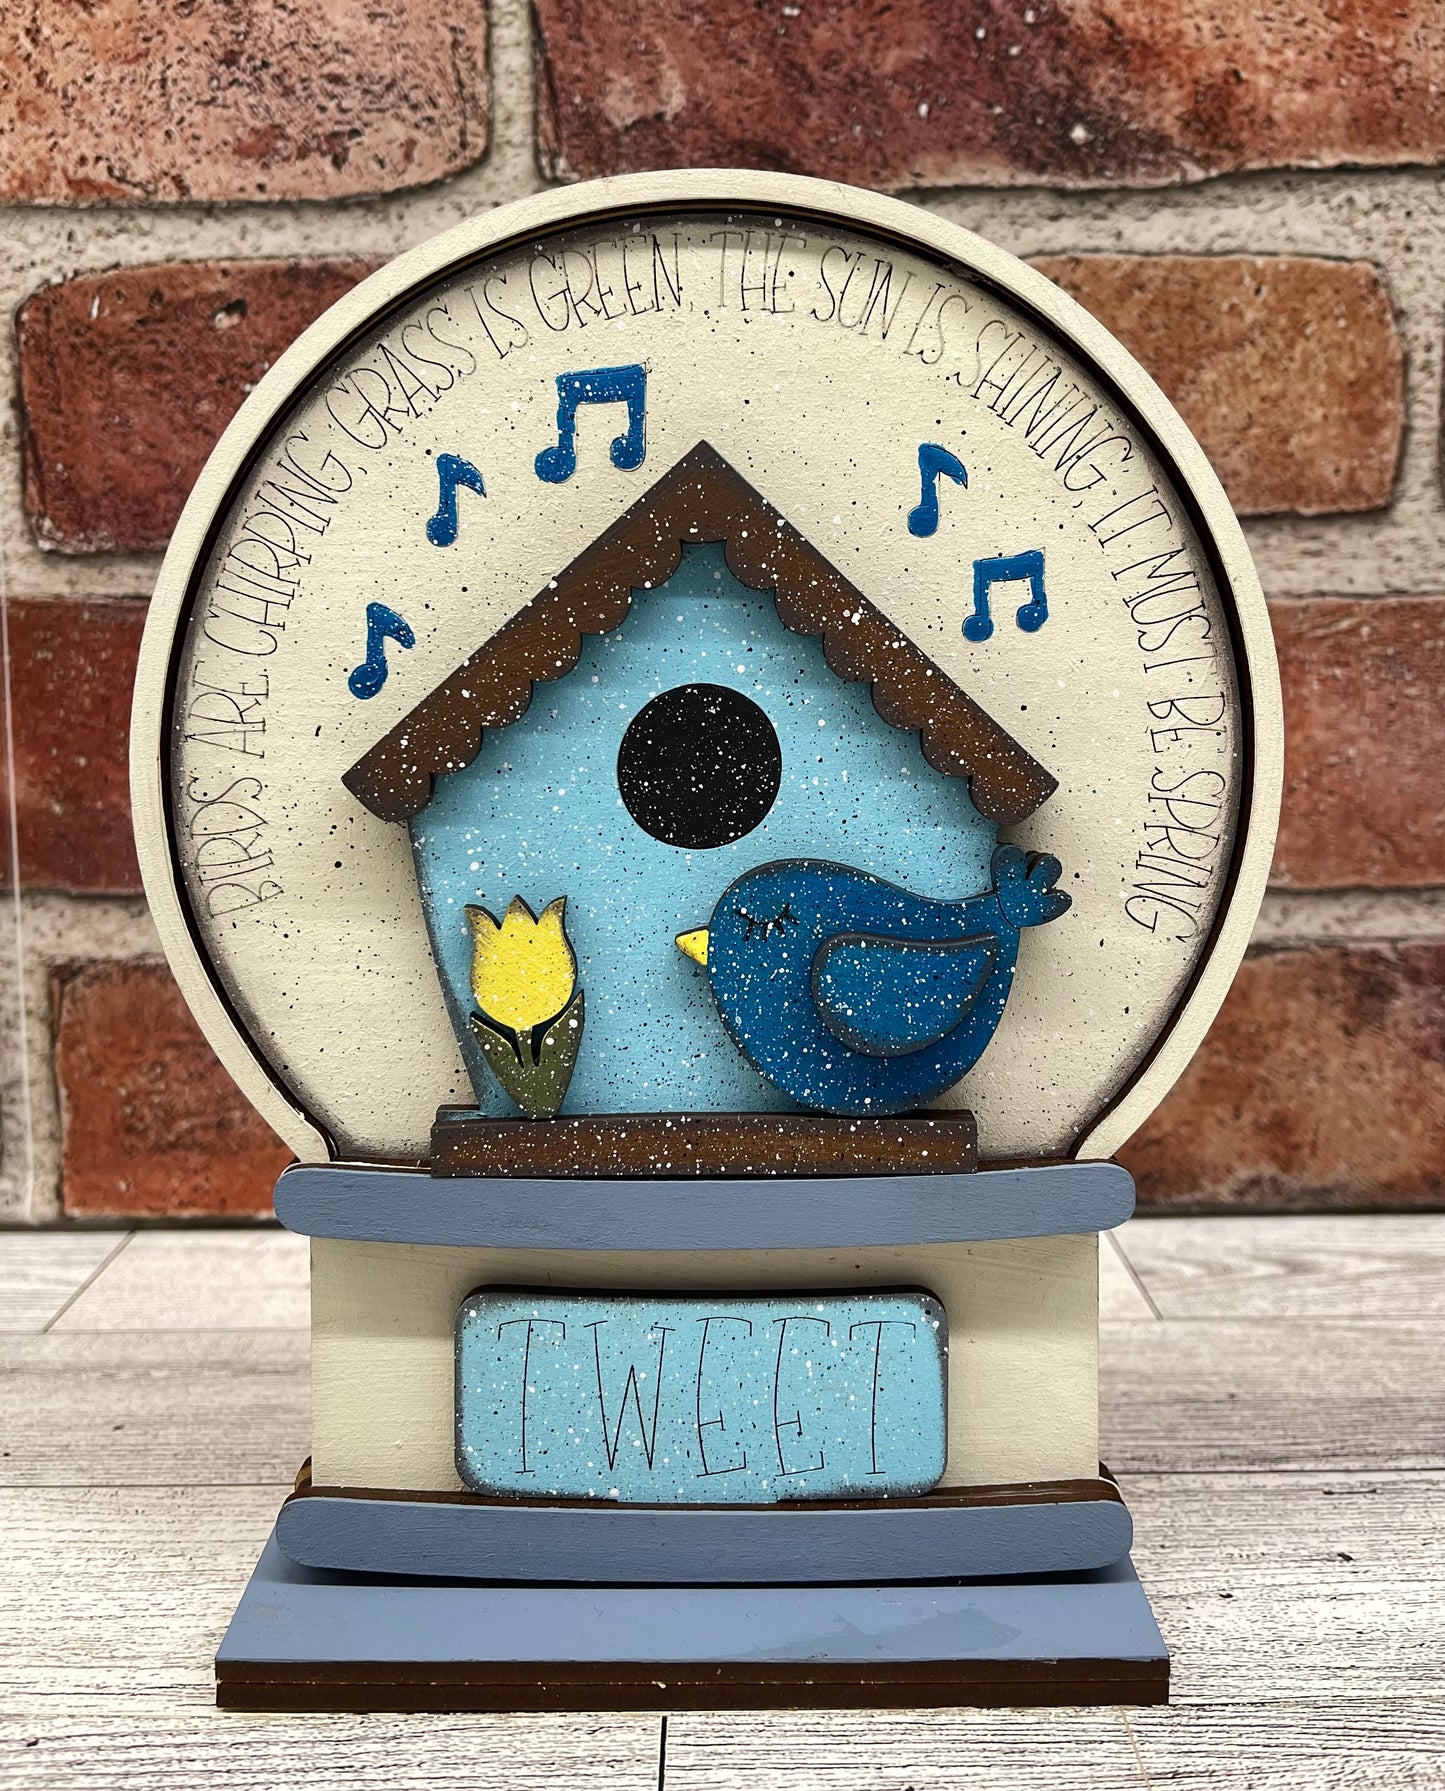 March Craft Kit - Birdhouse Themed - basket and water globe not included